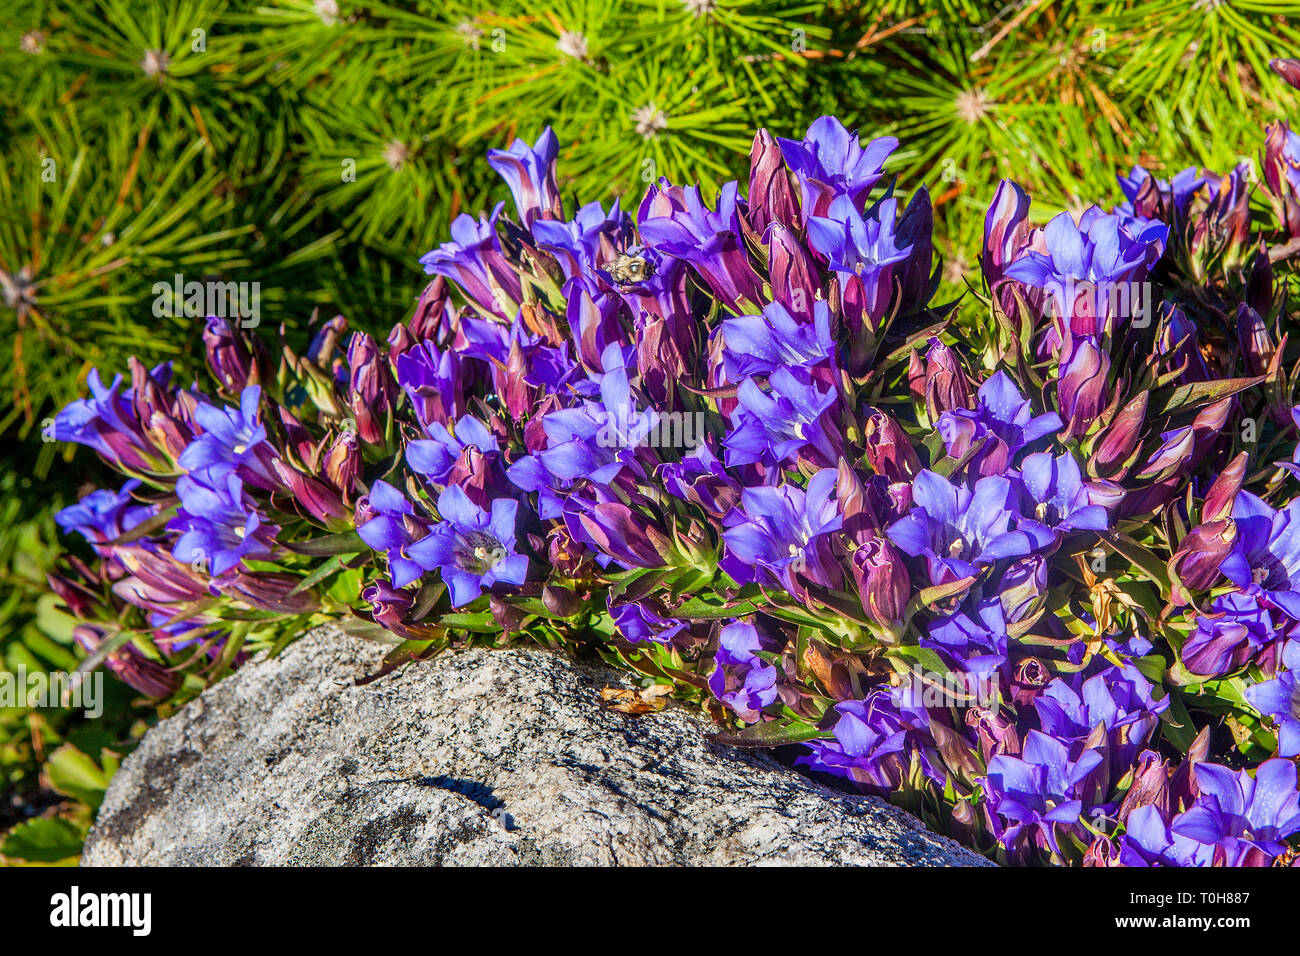 Open blooms of the Blue Gentian flowers garden ground cover - Gentiana scabra var. Blue Power. Stock Photo